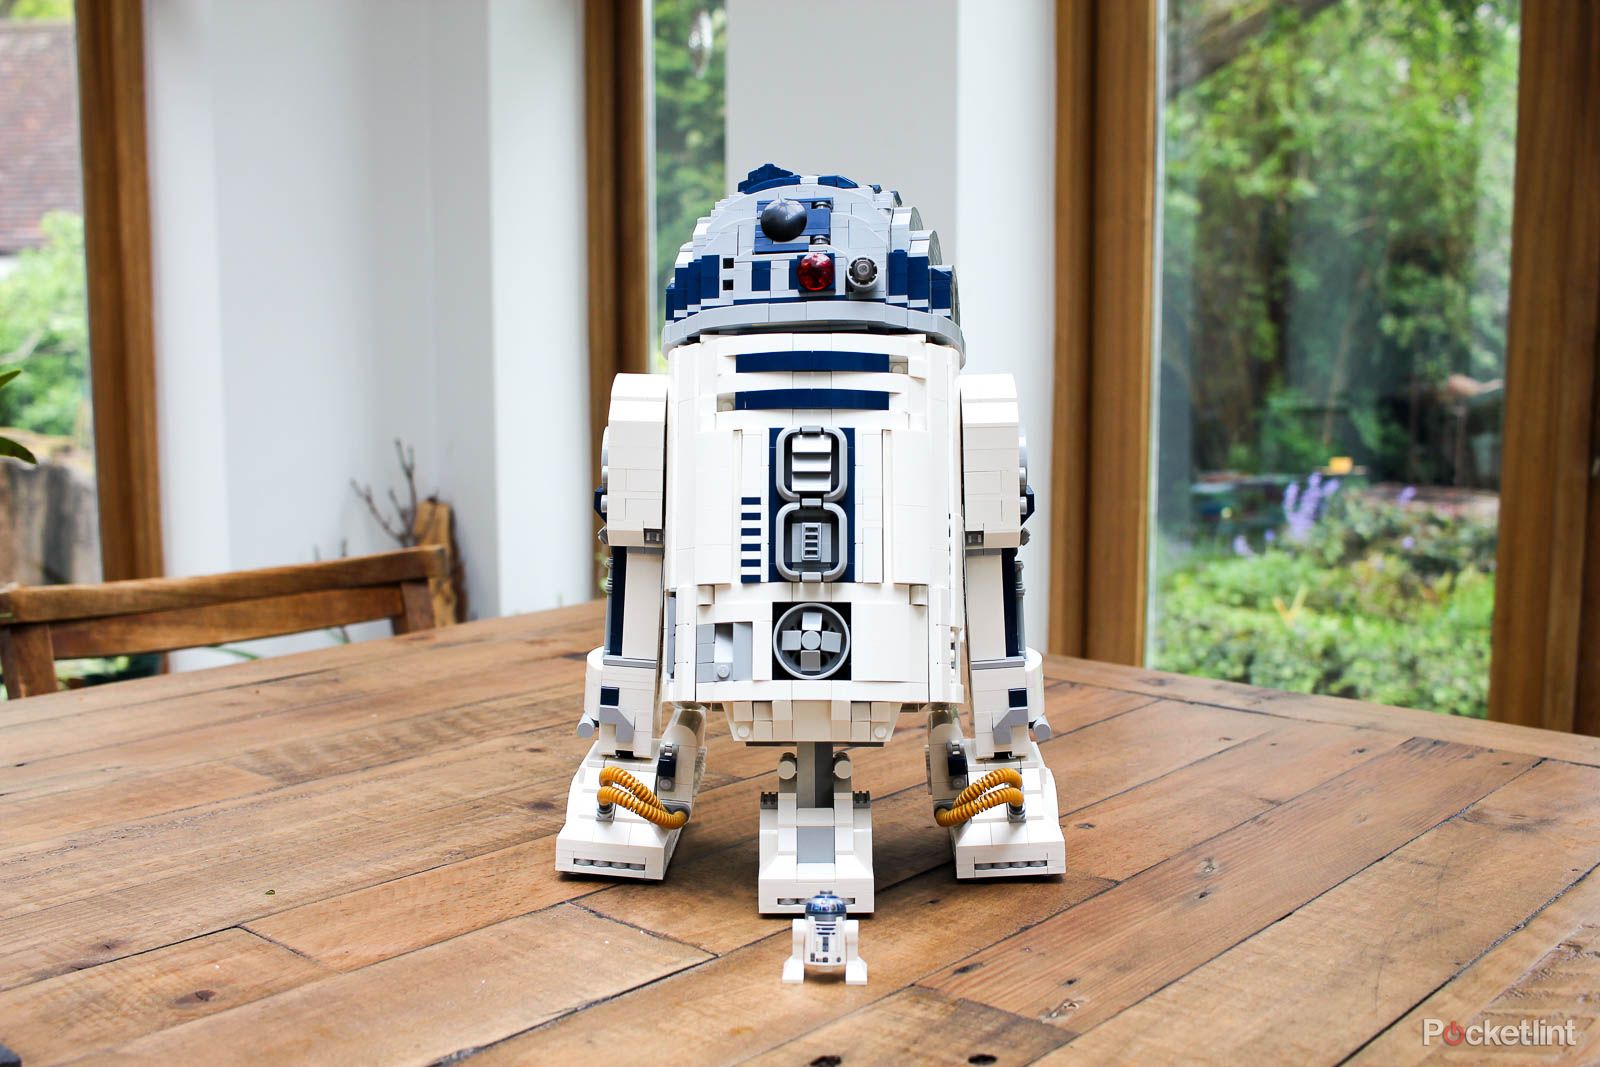 Lego R2-D2 hands on build pictures photo 19